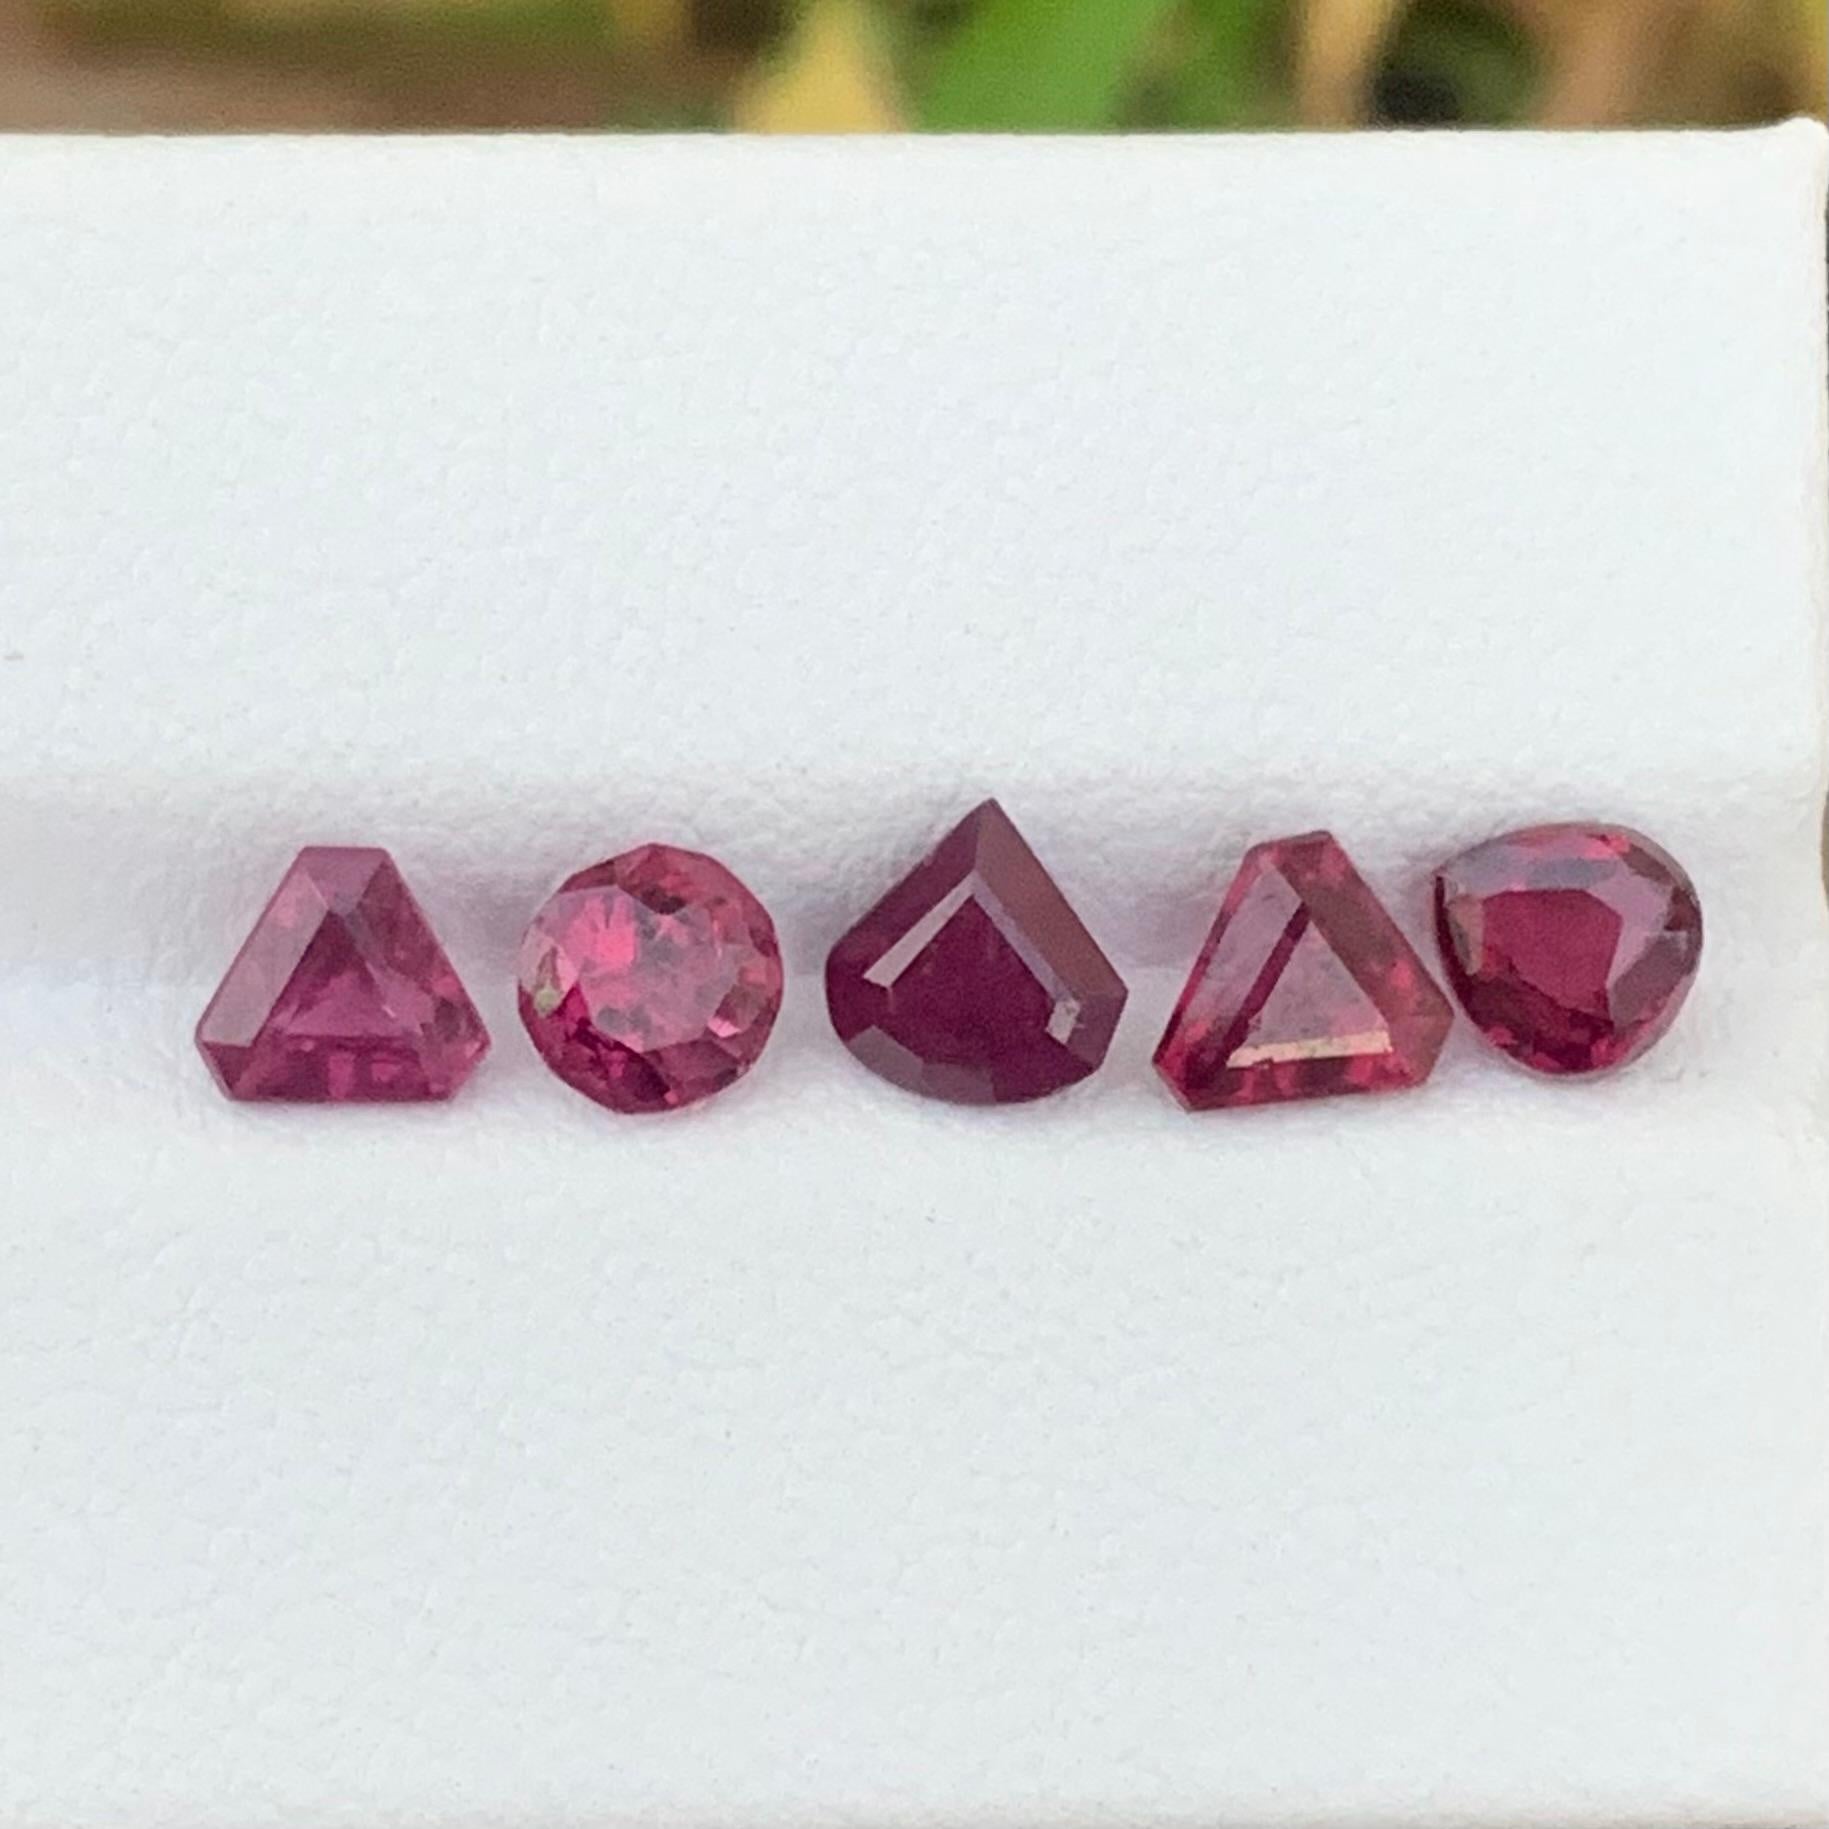 Loose Rhodolite Lot
Weight: 4.30 Carats 
Size: 0.80 to 0.95 Carats 
Origin: Tanzania
Shape: Multi / Mix
Color: Red 
Family; Garnet
Rhodolite garnet is a captivating gemstone renowned for its enchanting raspberry-red to purplish-pink hues. A variety